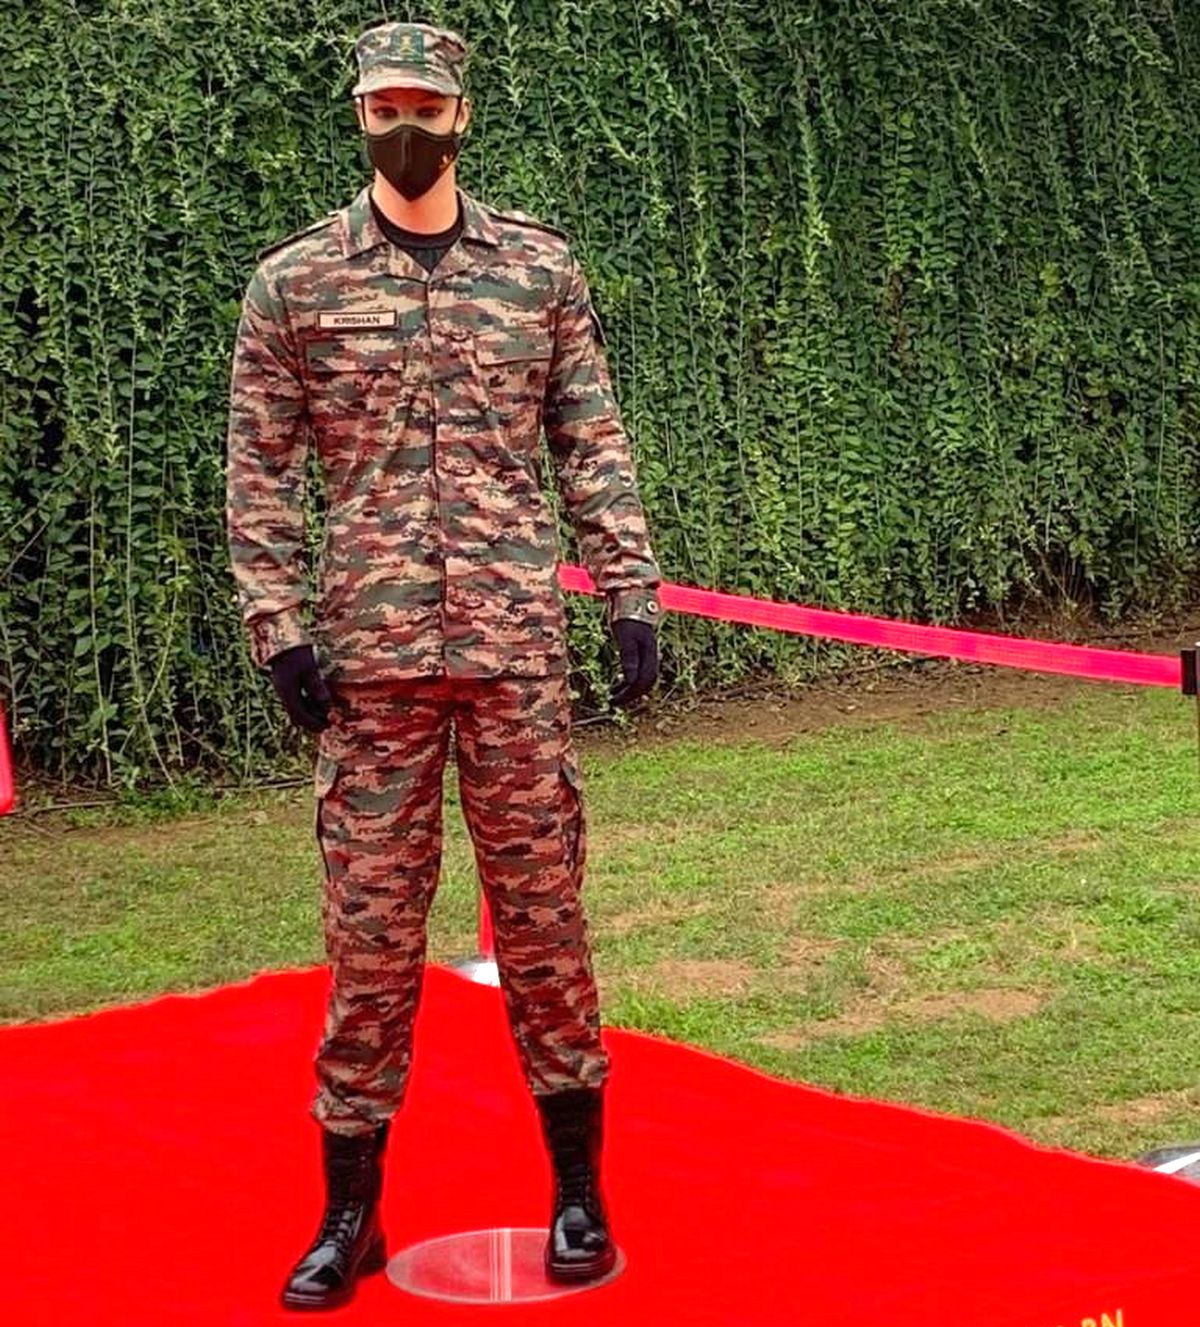 Army takes out patent on new camouflage-style uniform